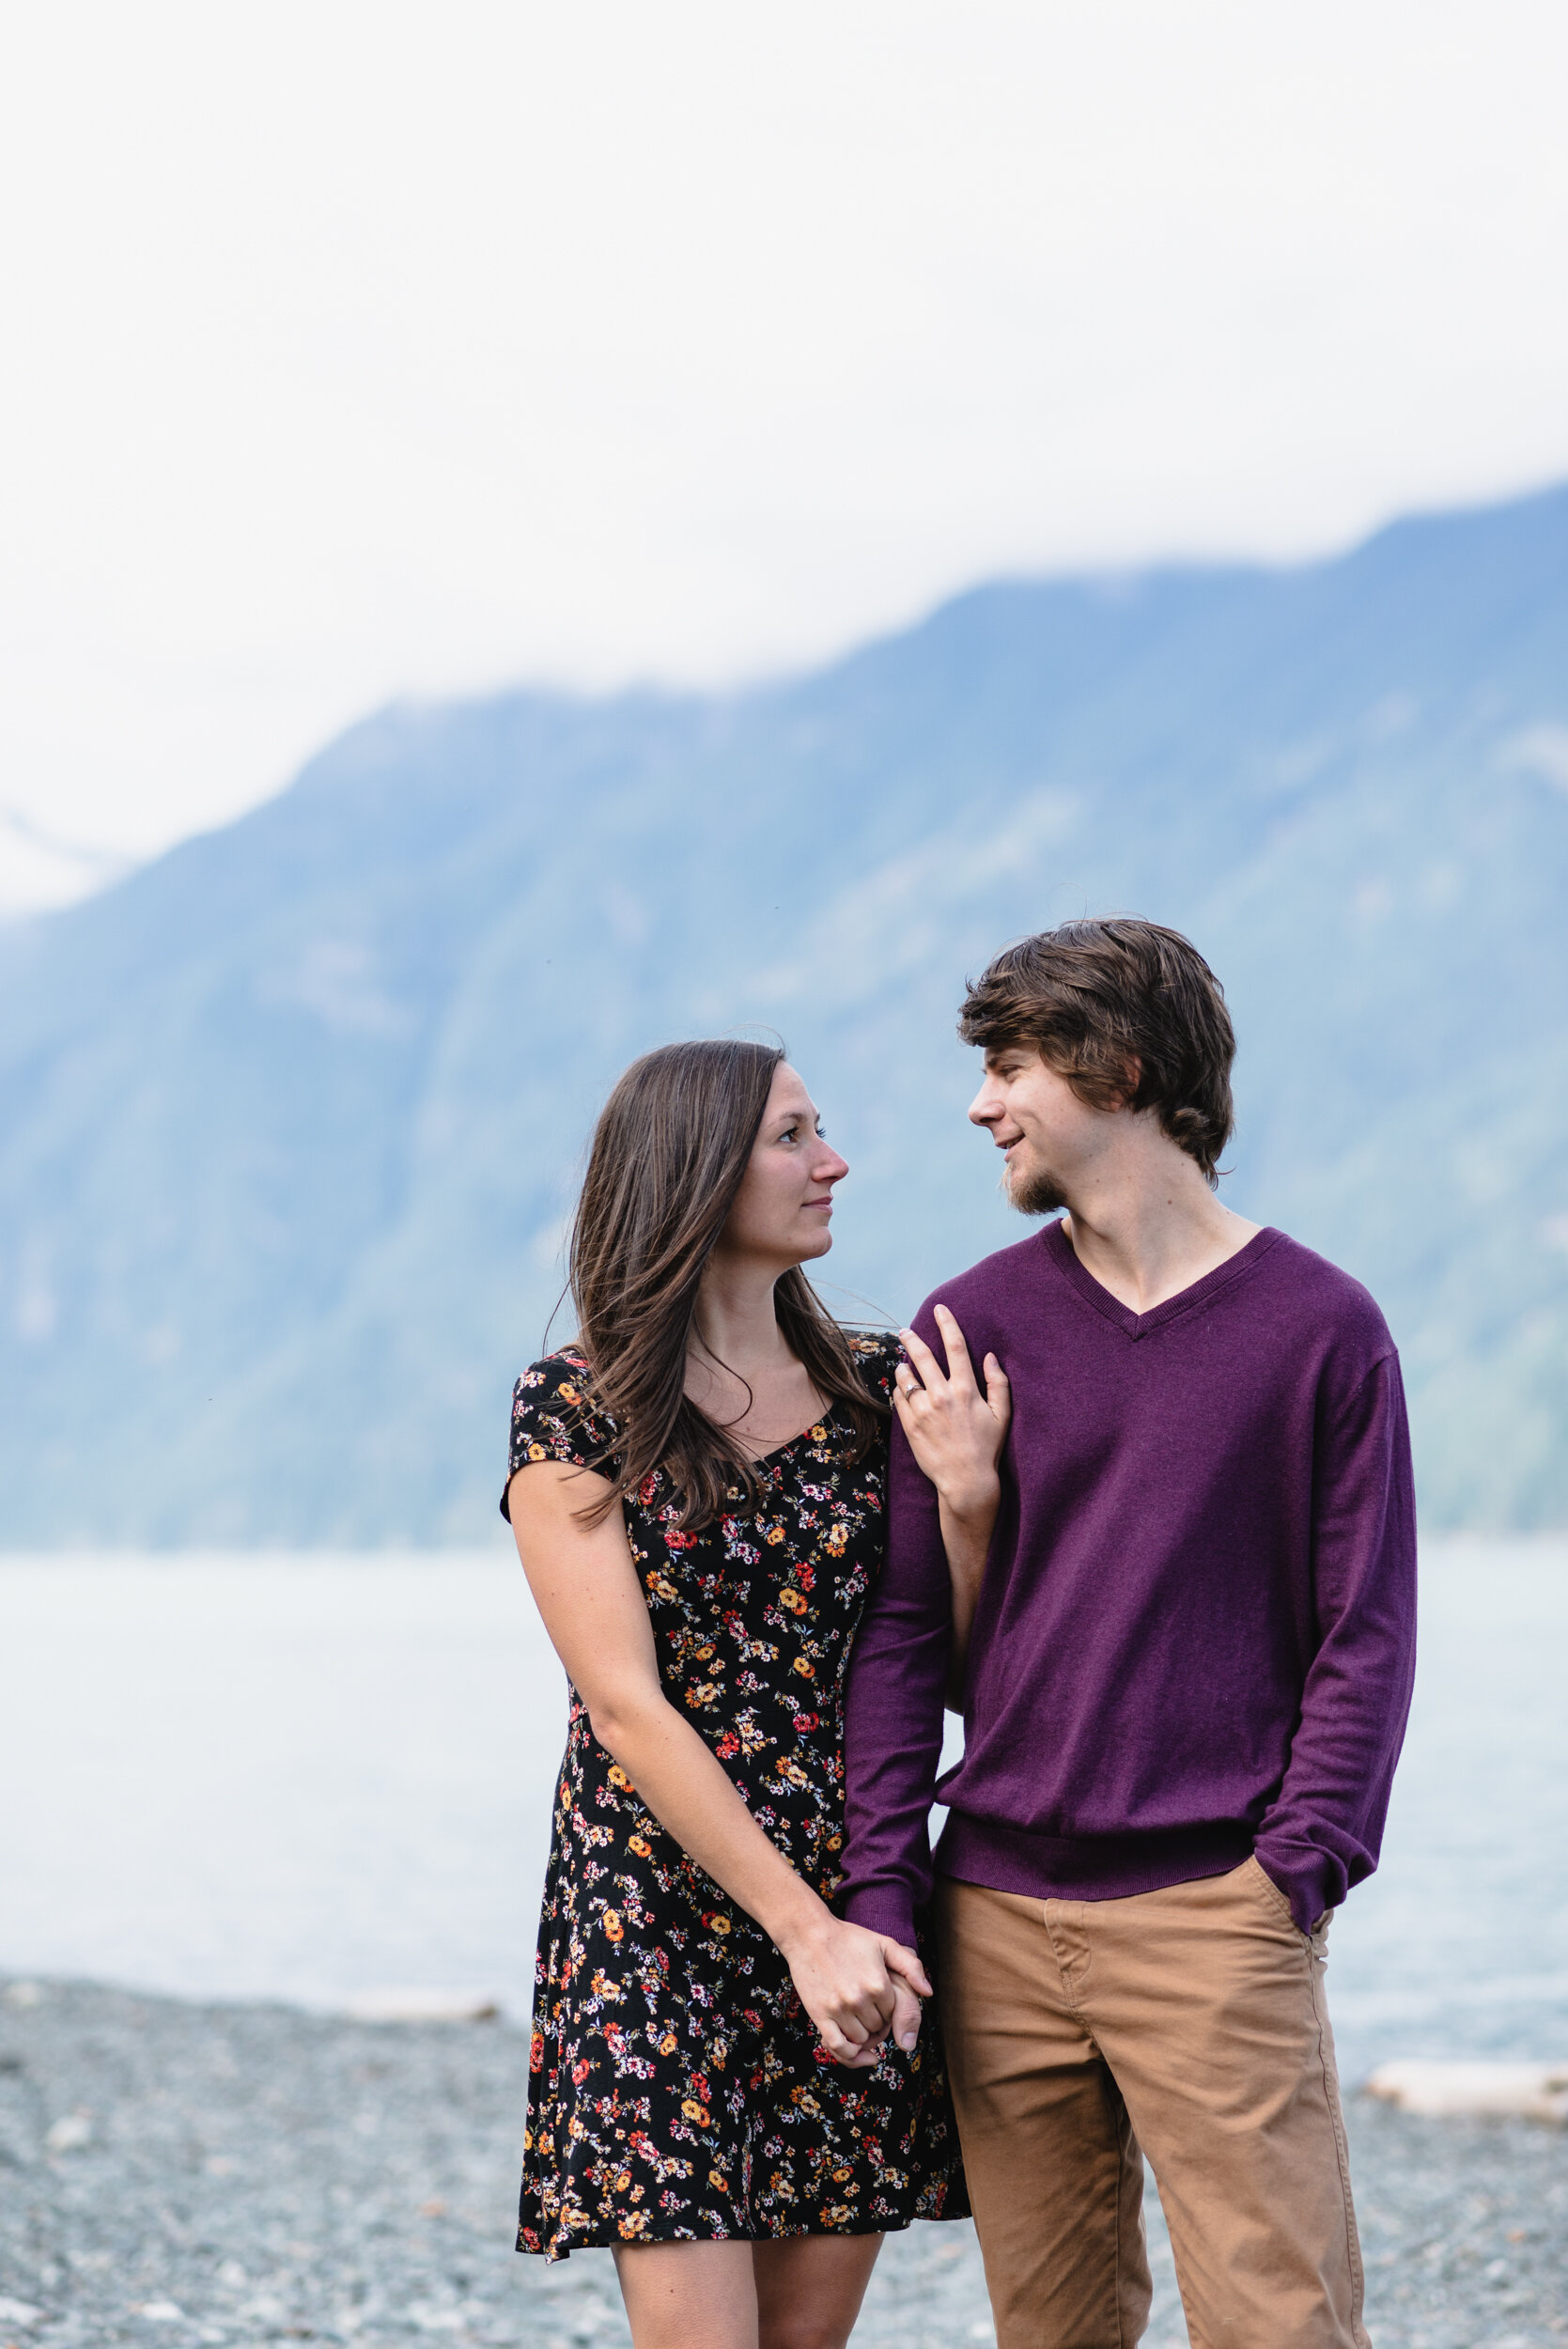 Couple smiling at each other at lakeshore